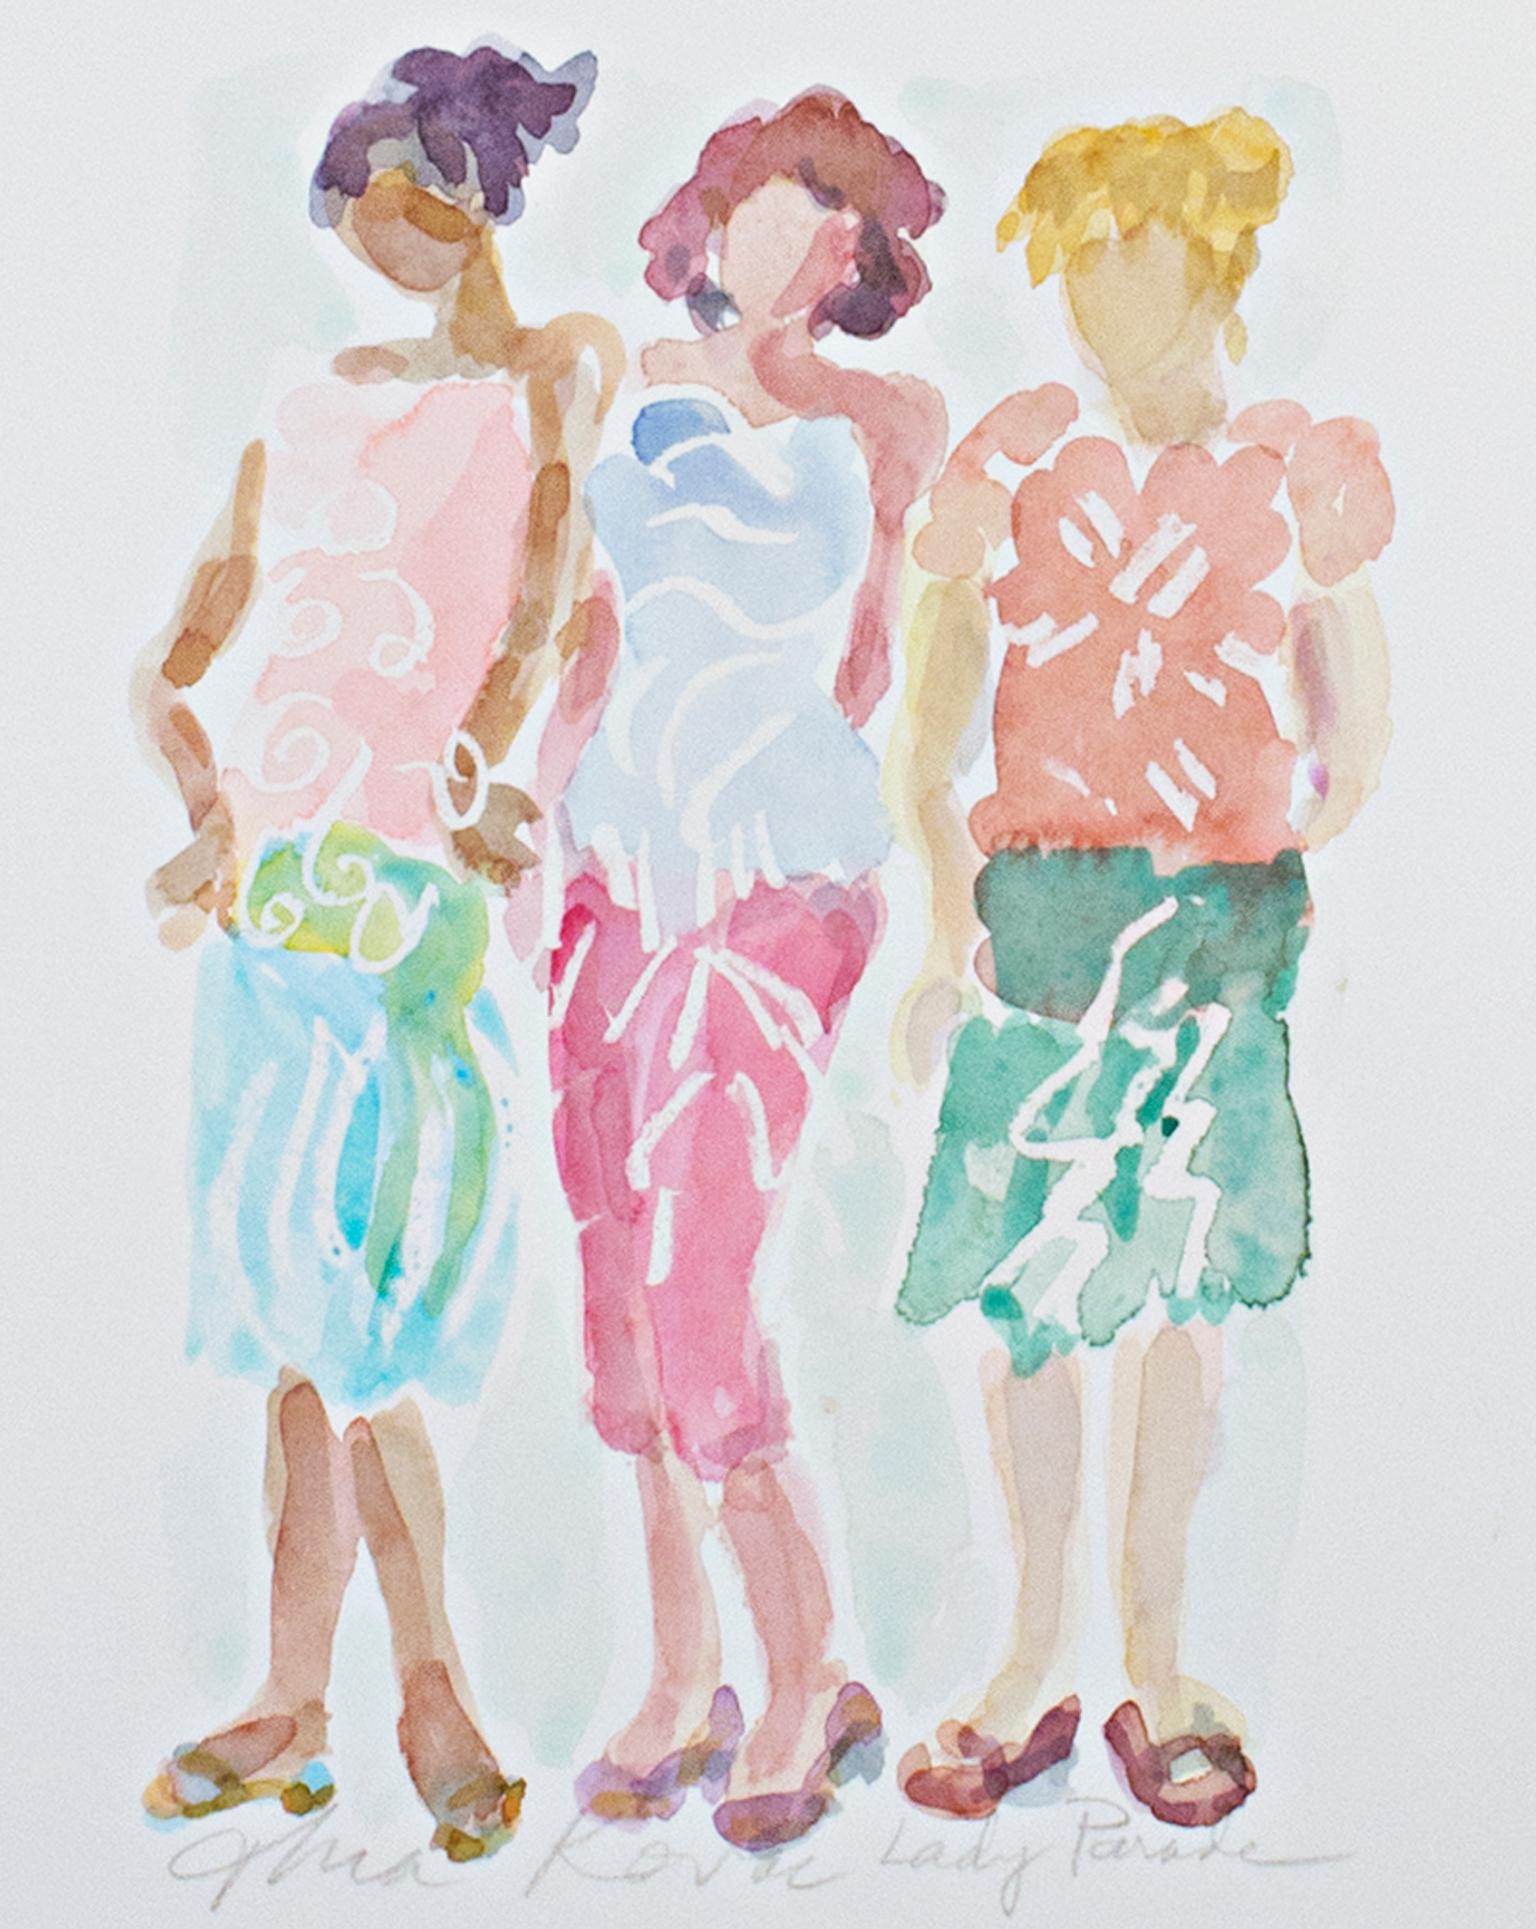 "Lady Parade III" is an original watercolor painting by Thea Kovac. The artist signed and titled the piece below the image. This piece features three women in brightly colored dress.

9" x 6 1/2" art
19" x 15 1/4" frame

THEA KOVAC is a visual